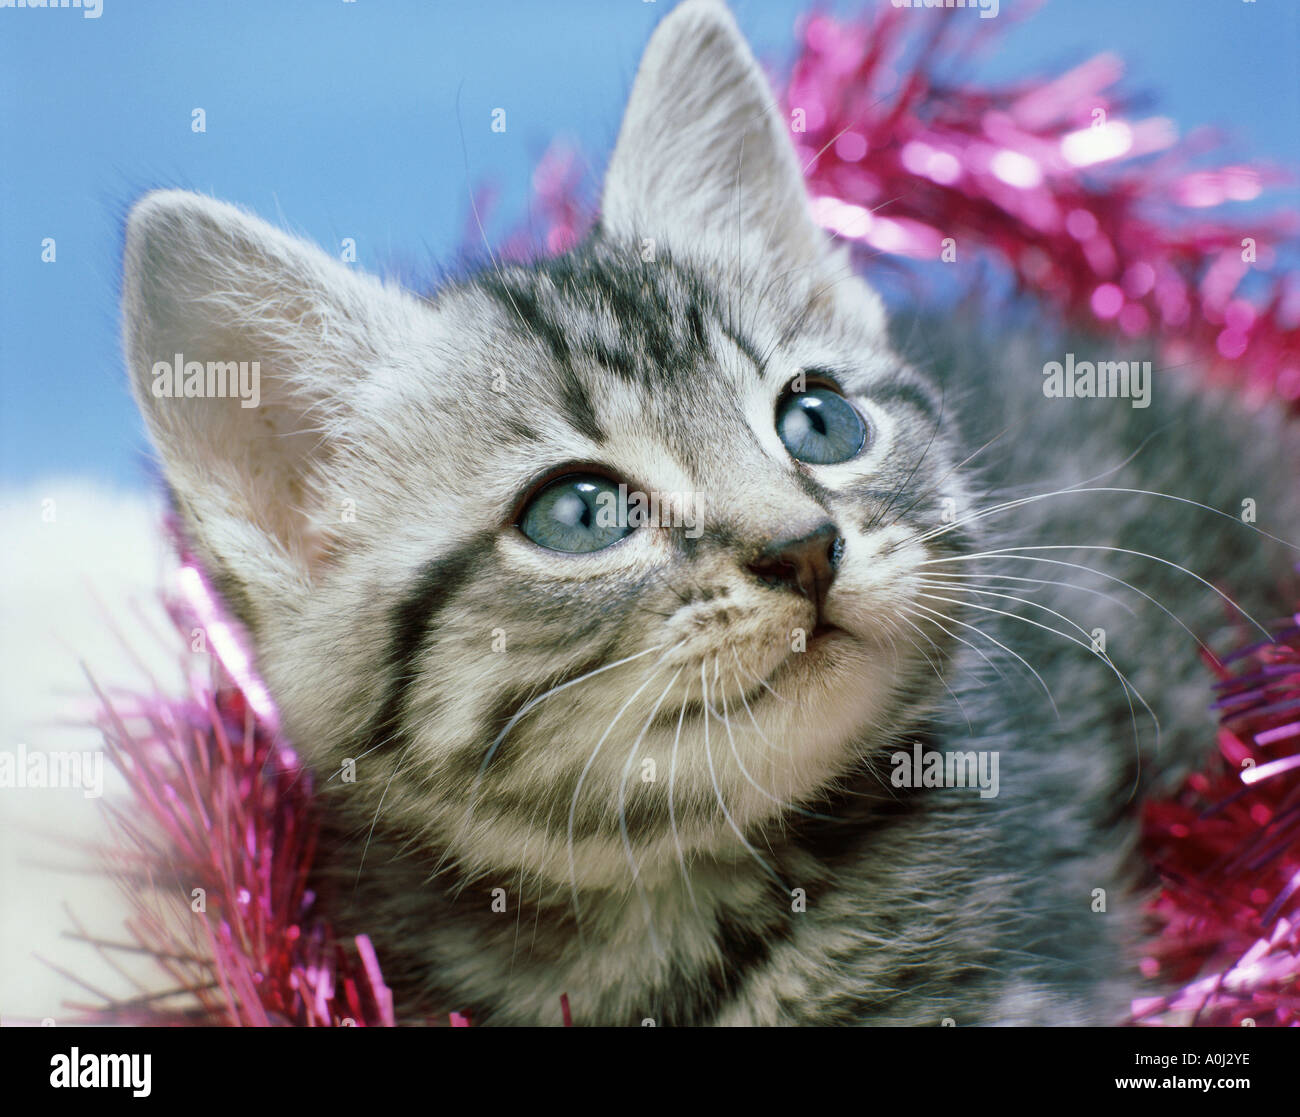 Close-up of a kitten wrapped in decorations Stock Photo